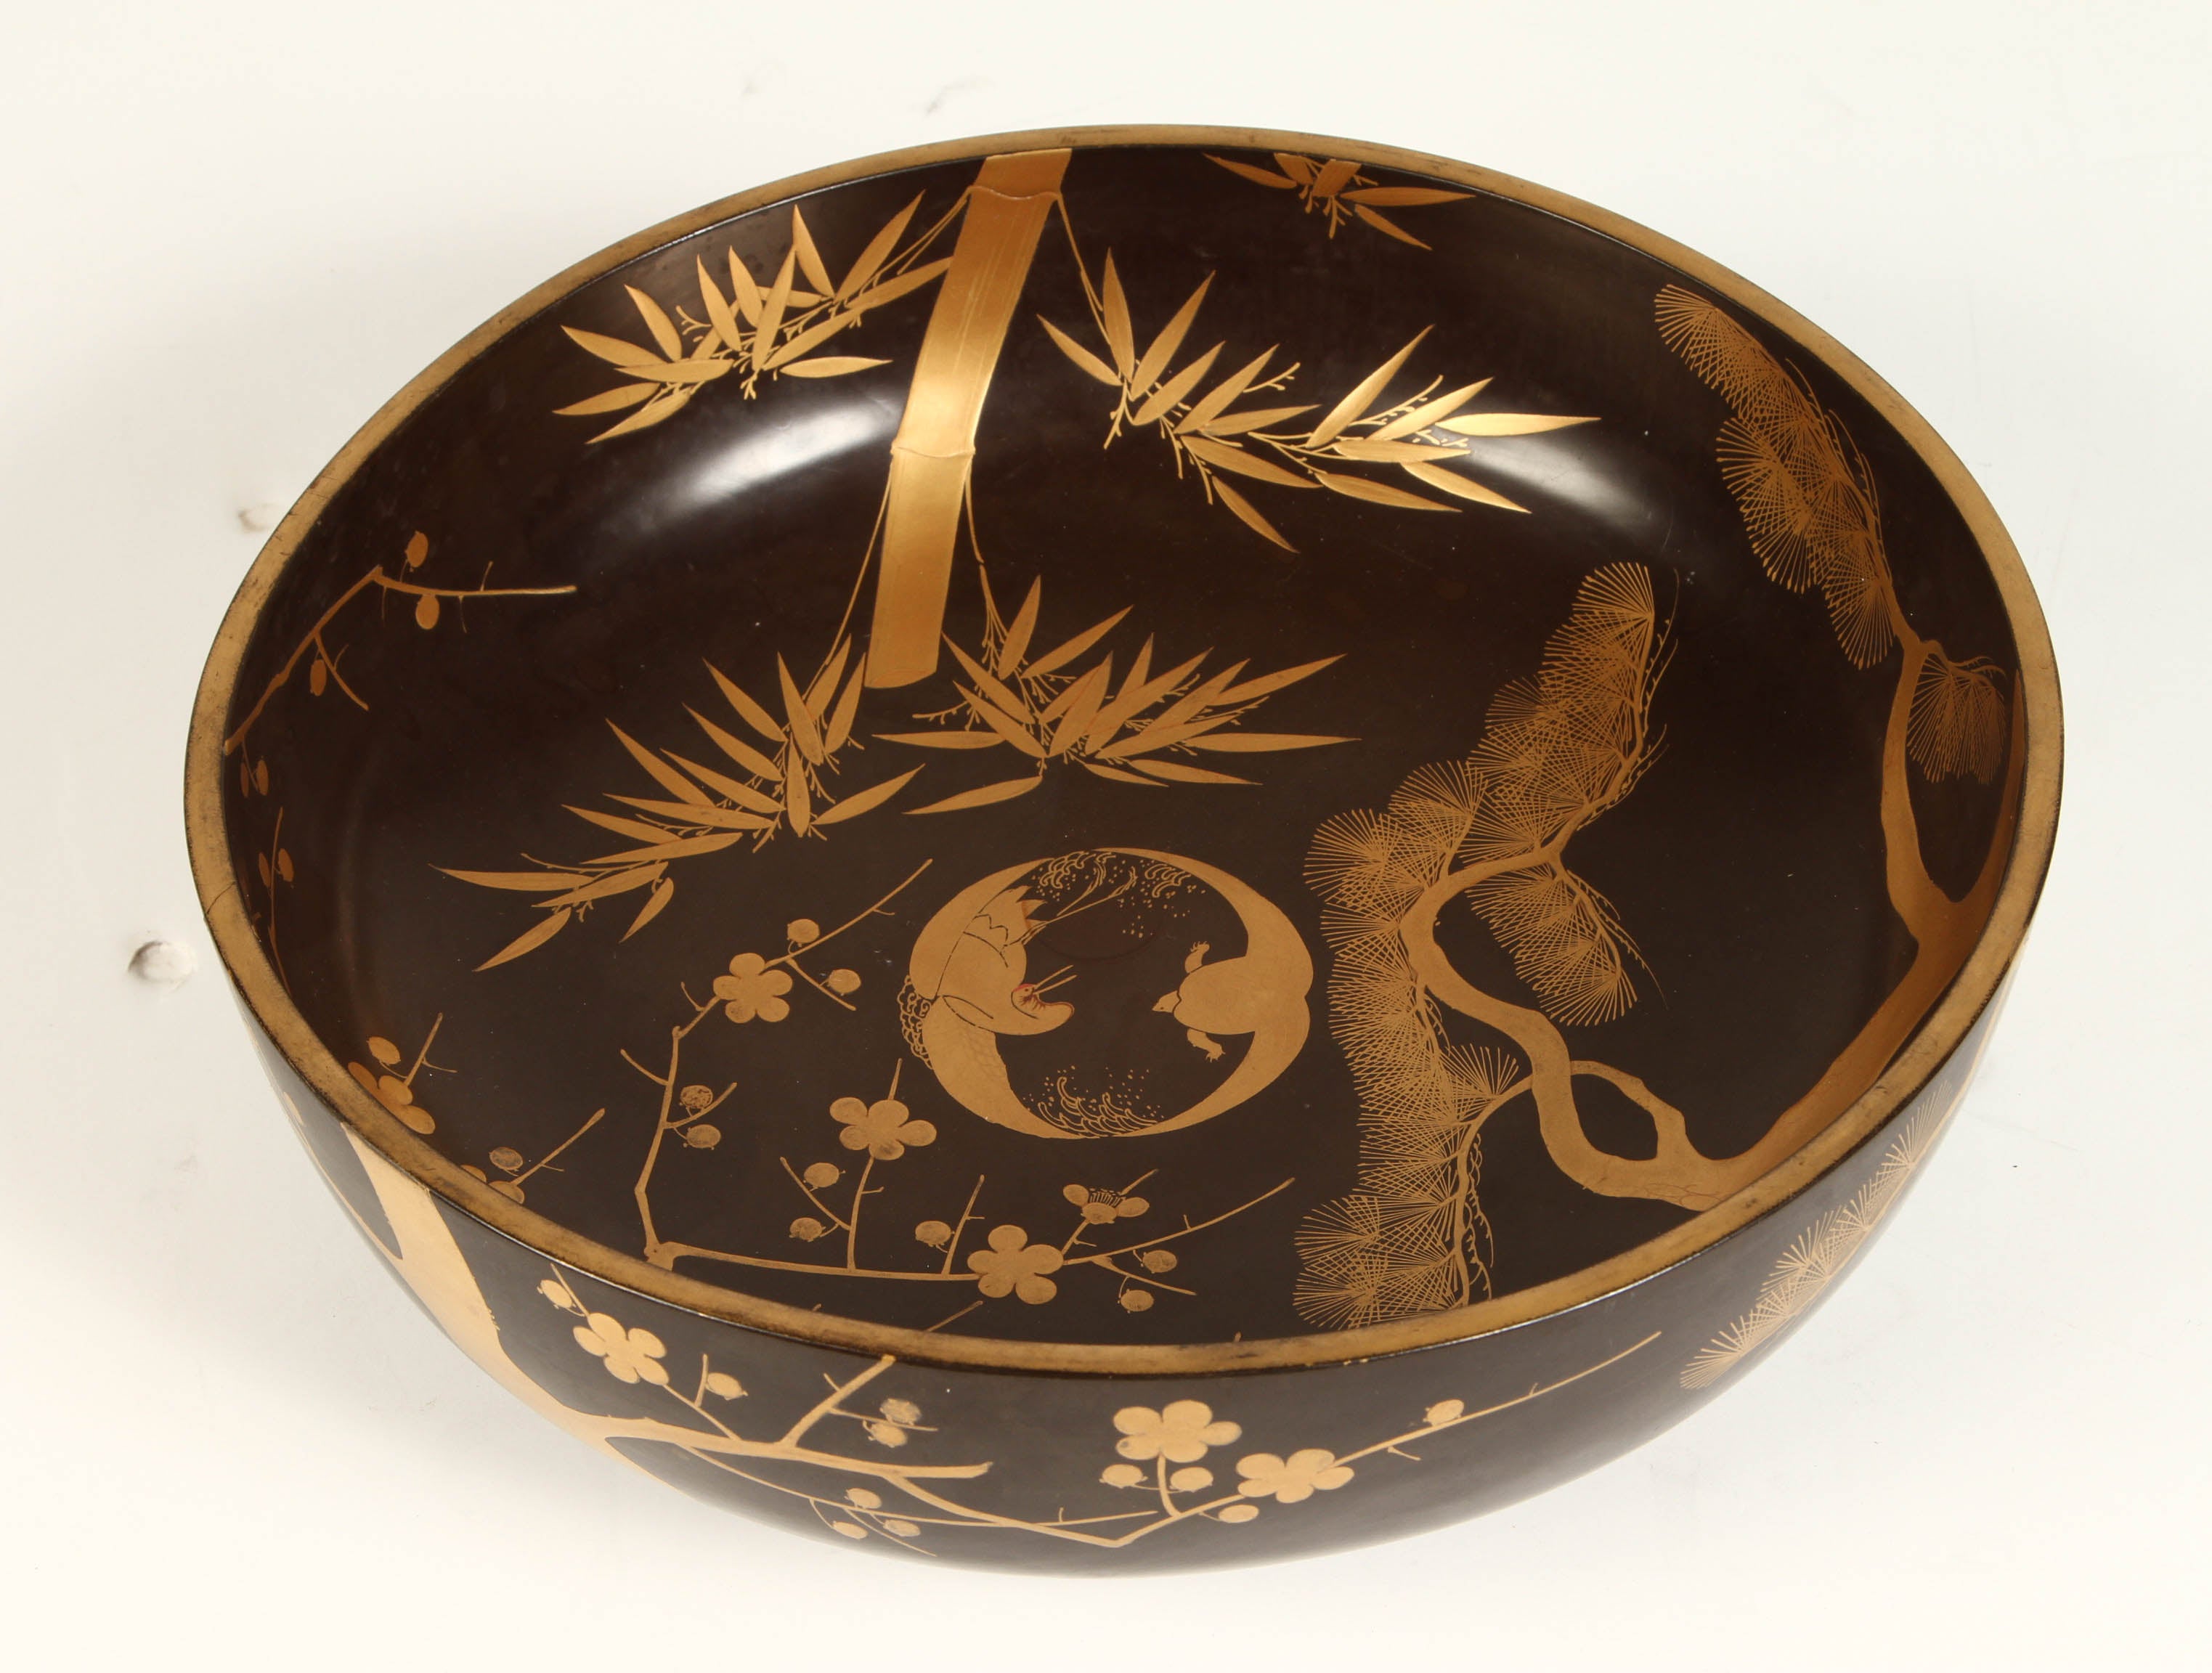 Japanese Lacquer Bowl Depicting the Four Seasons